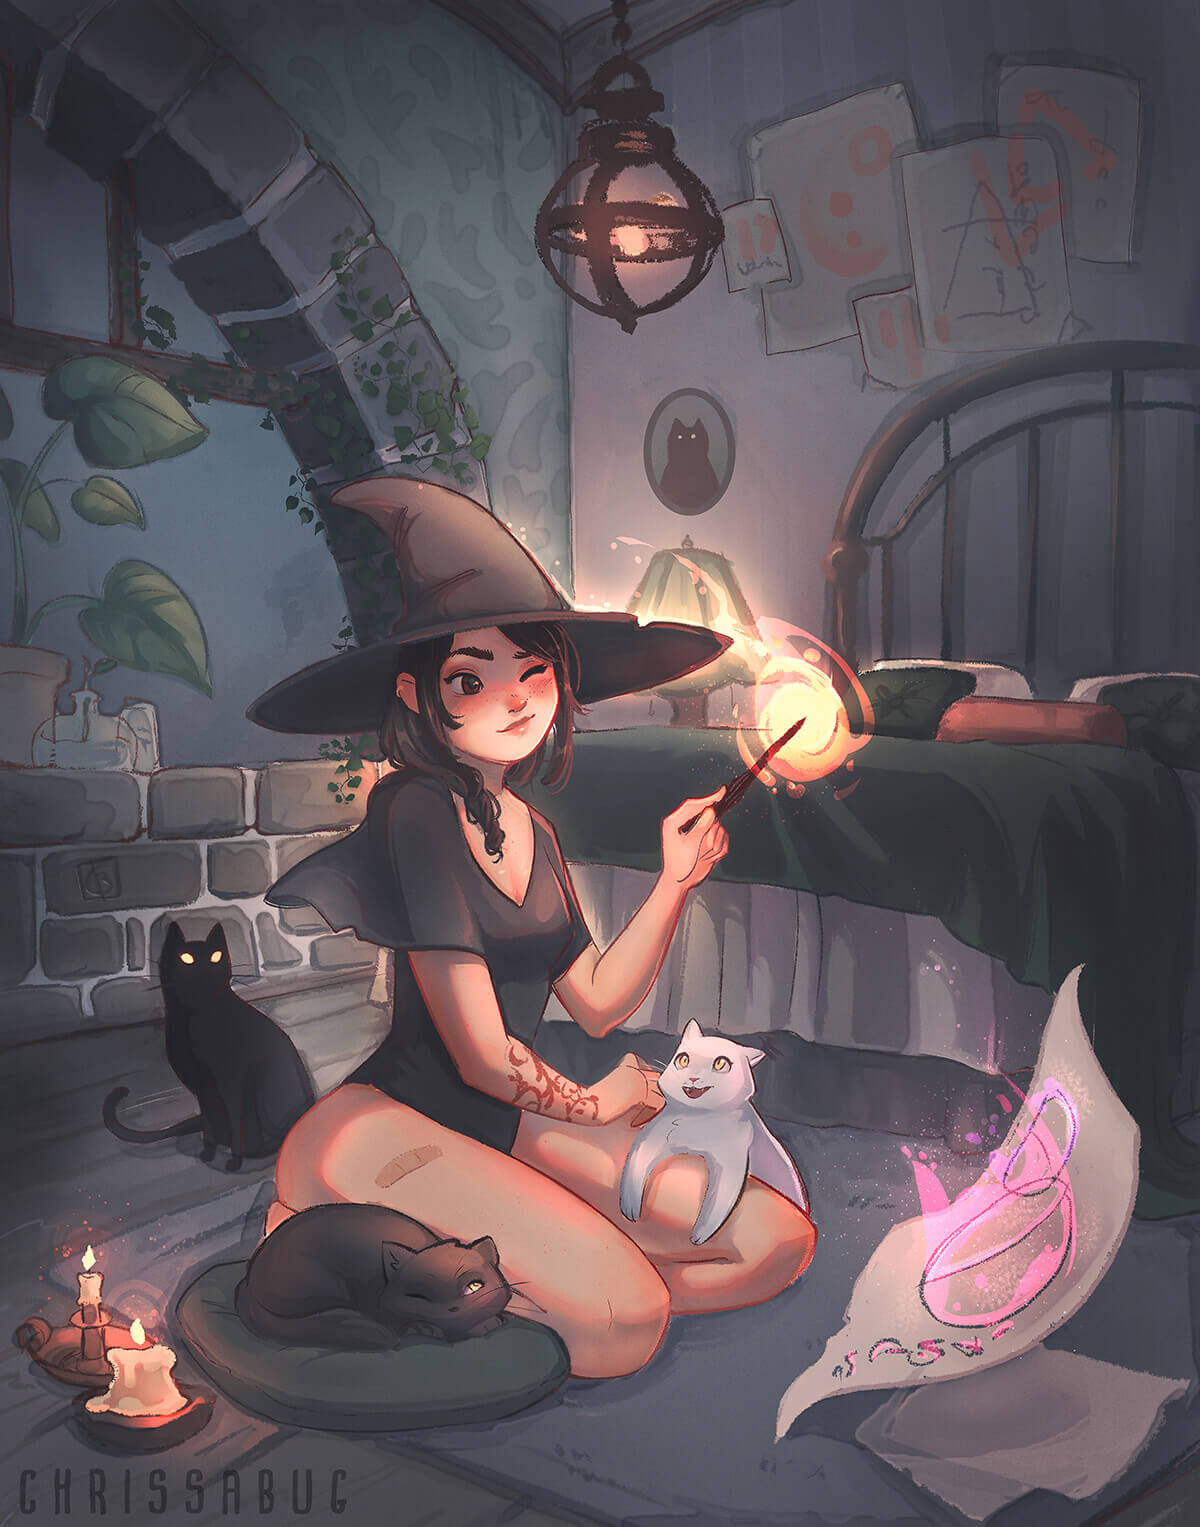 Digital art of a witch sitting on the floor, surrounded by cats